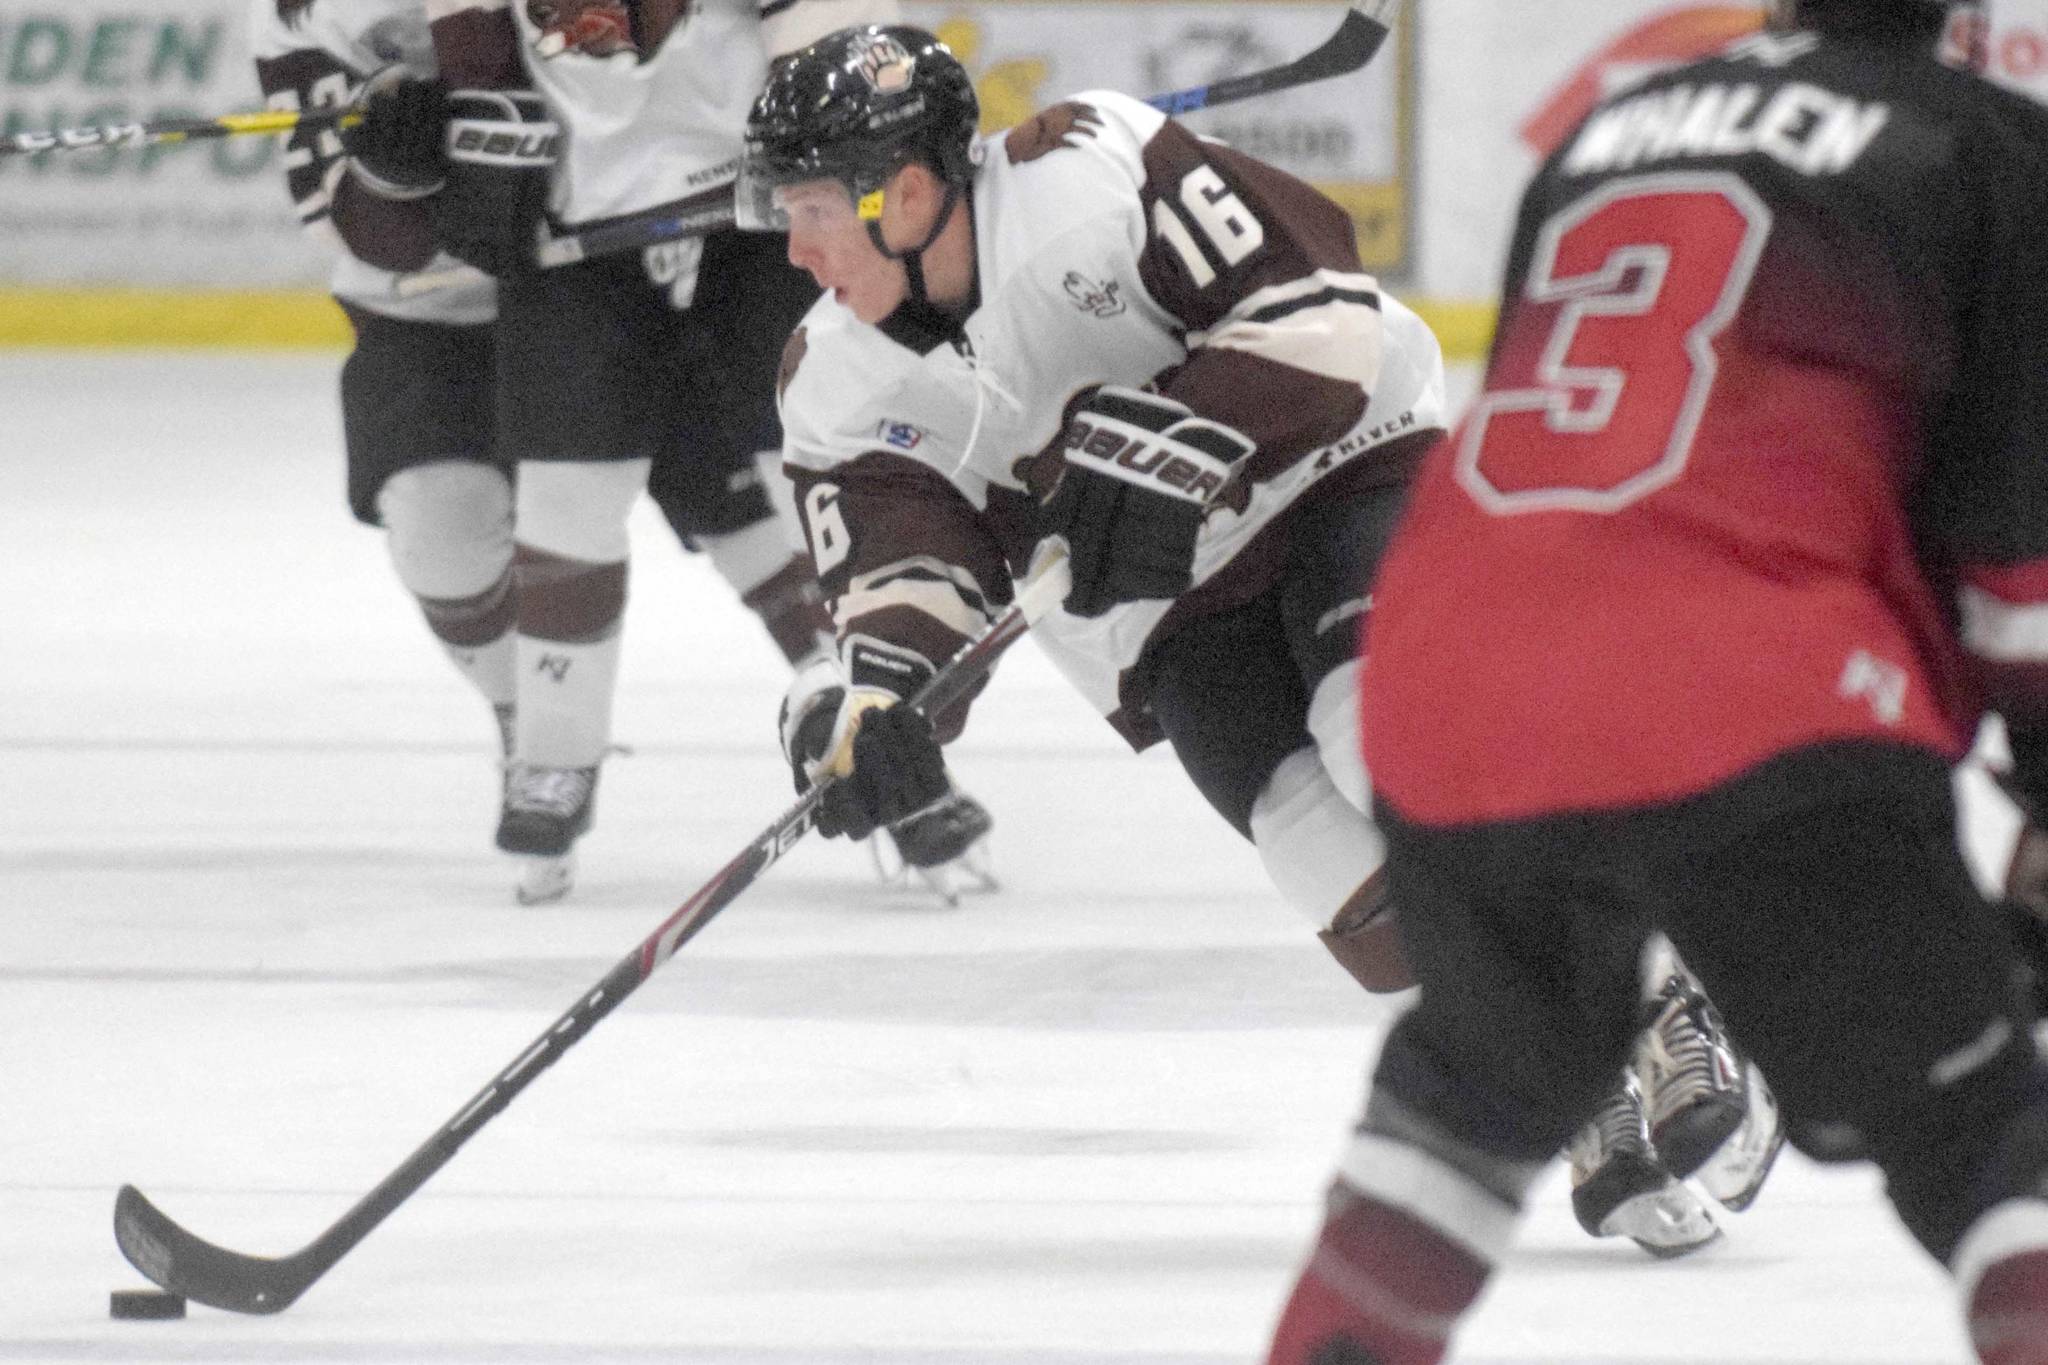 Kenai River Brown Bears forward Theo Thrun brings the puck up the ice on Friday, Oct. 18, 2019, against the Minnesota Magicians at the Soldotna Regional Sports Complex in Soldotna, Alaska. (Photo by Jeff Helminiak/Peninsula Clarion)